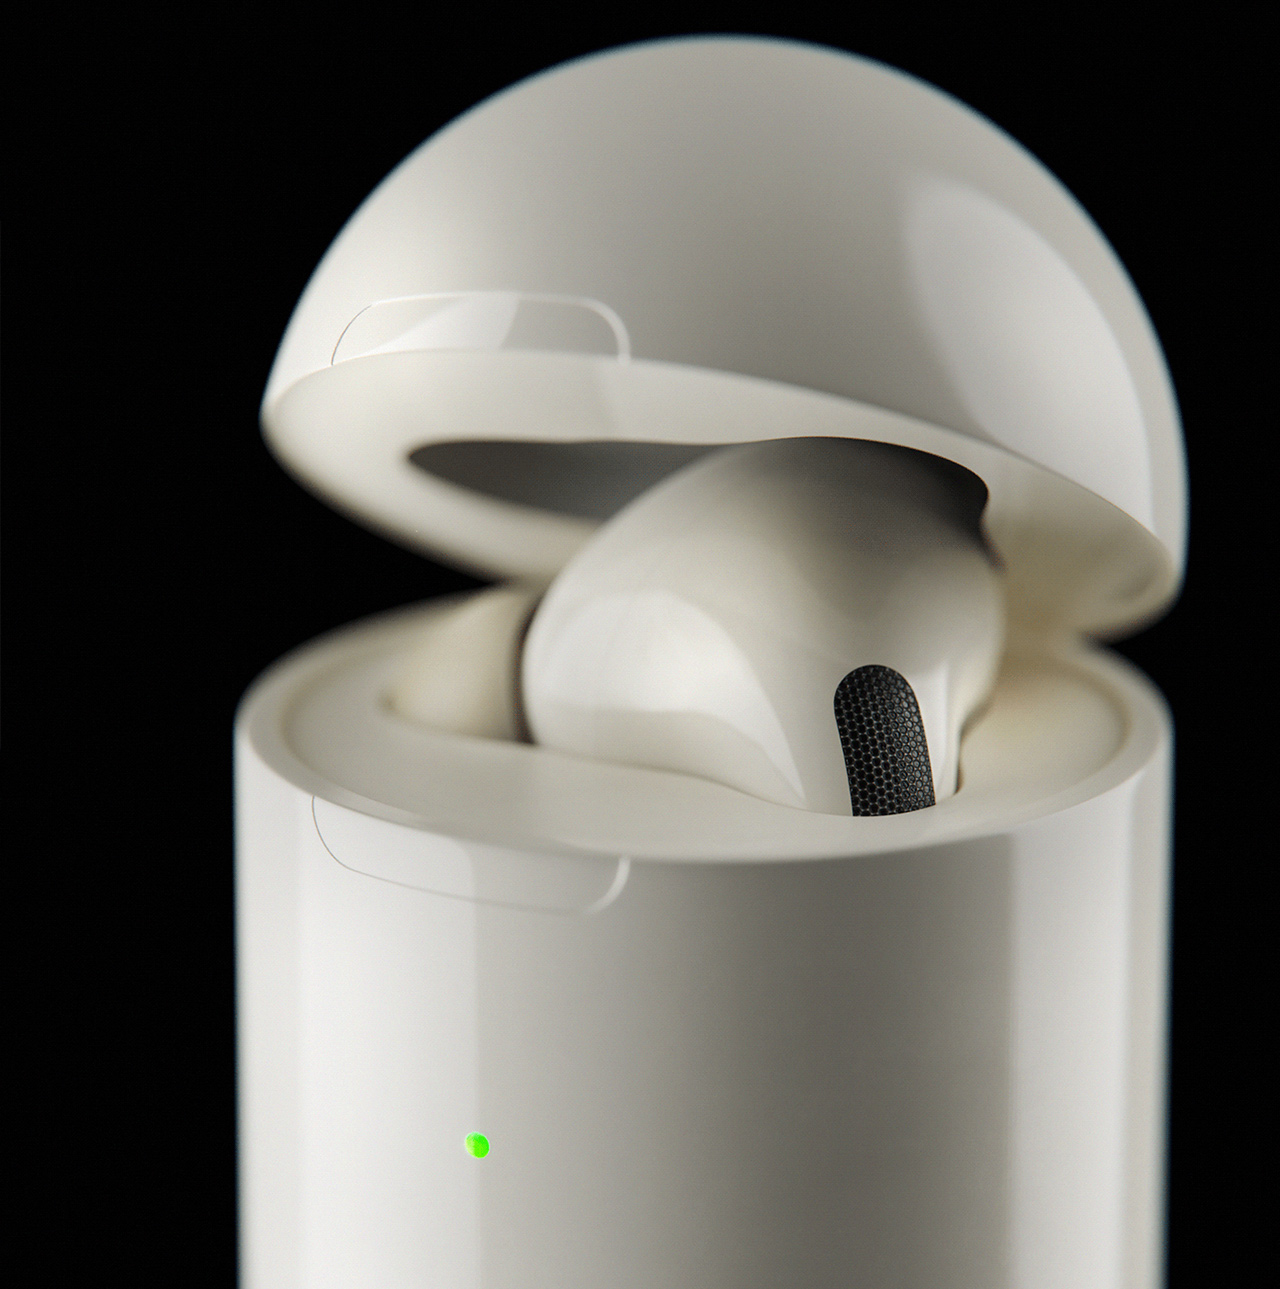 This new AirPods Pro case takes on a barrel shape to fit in